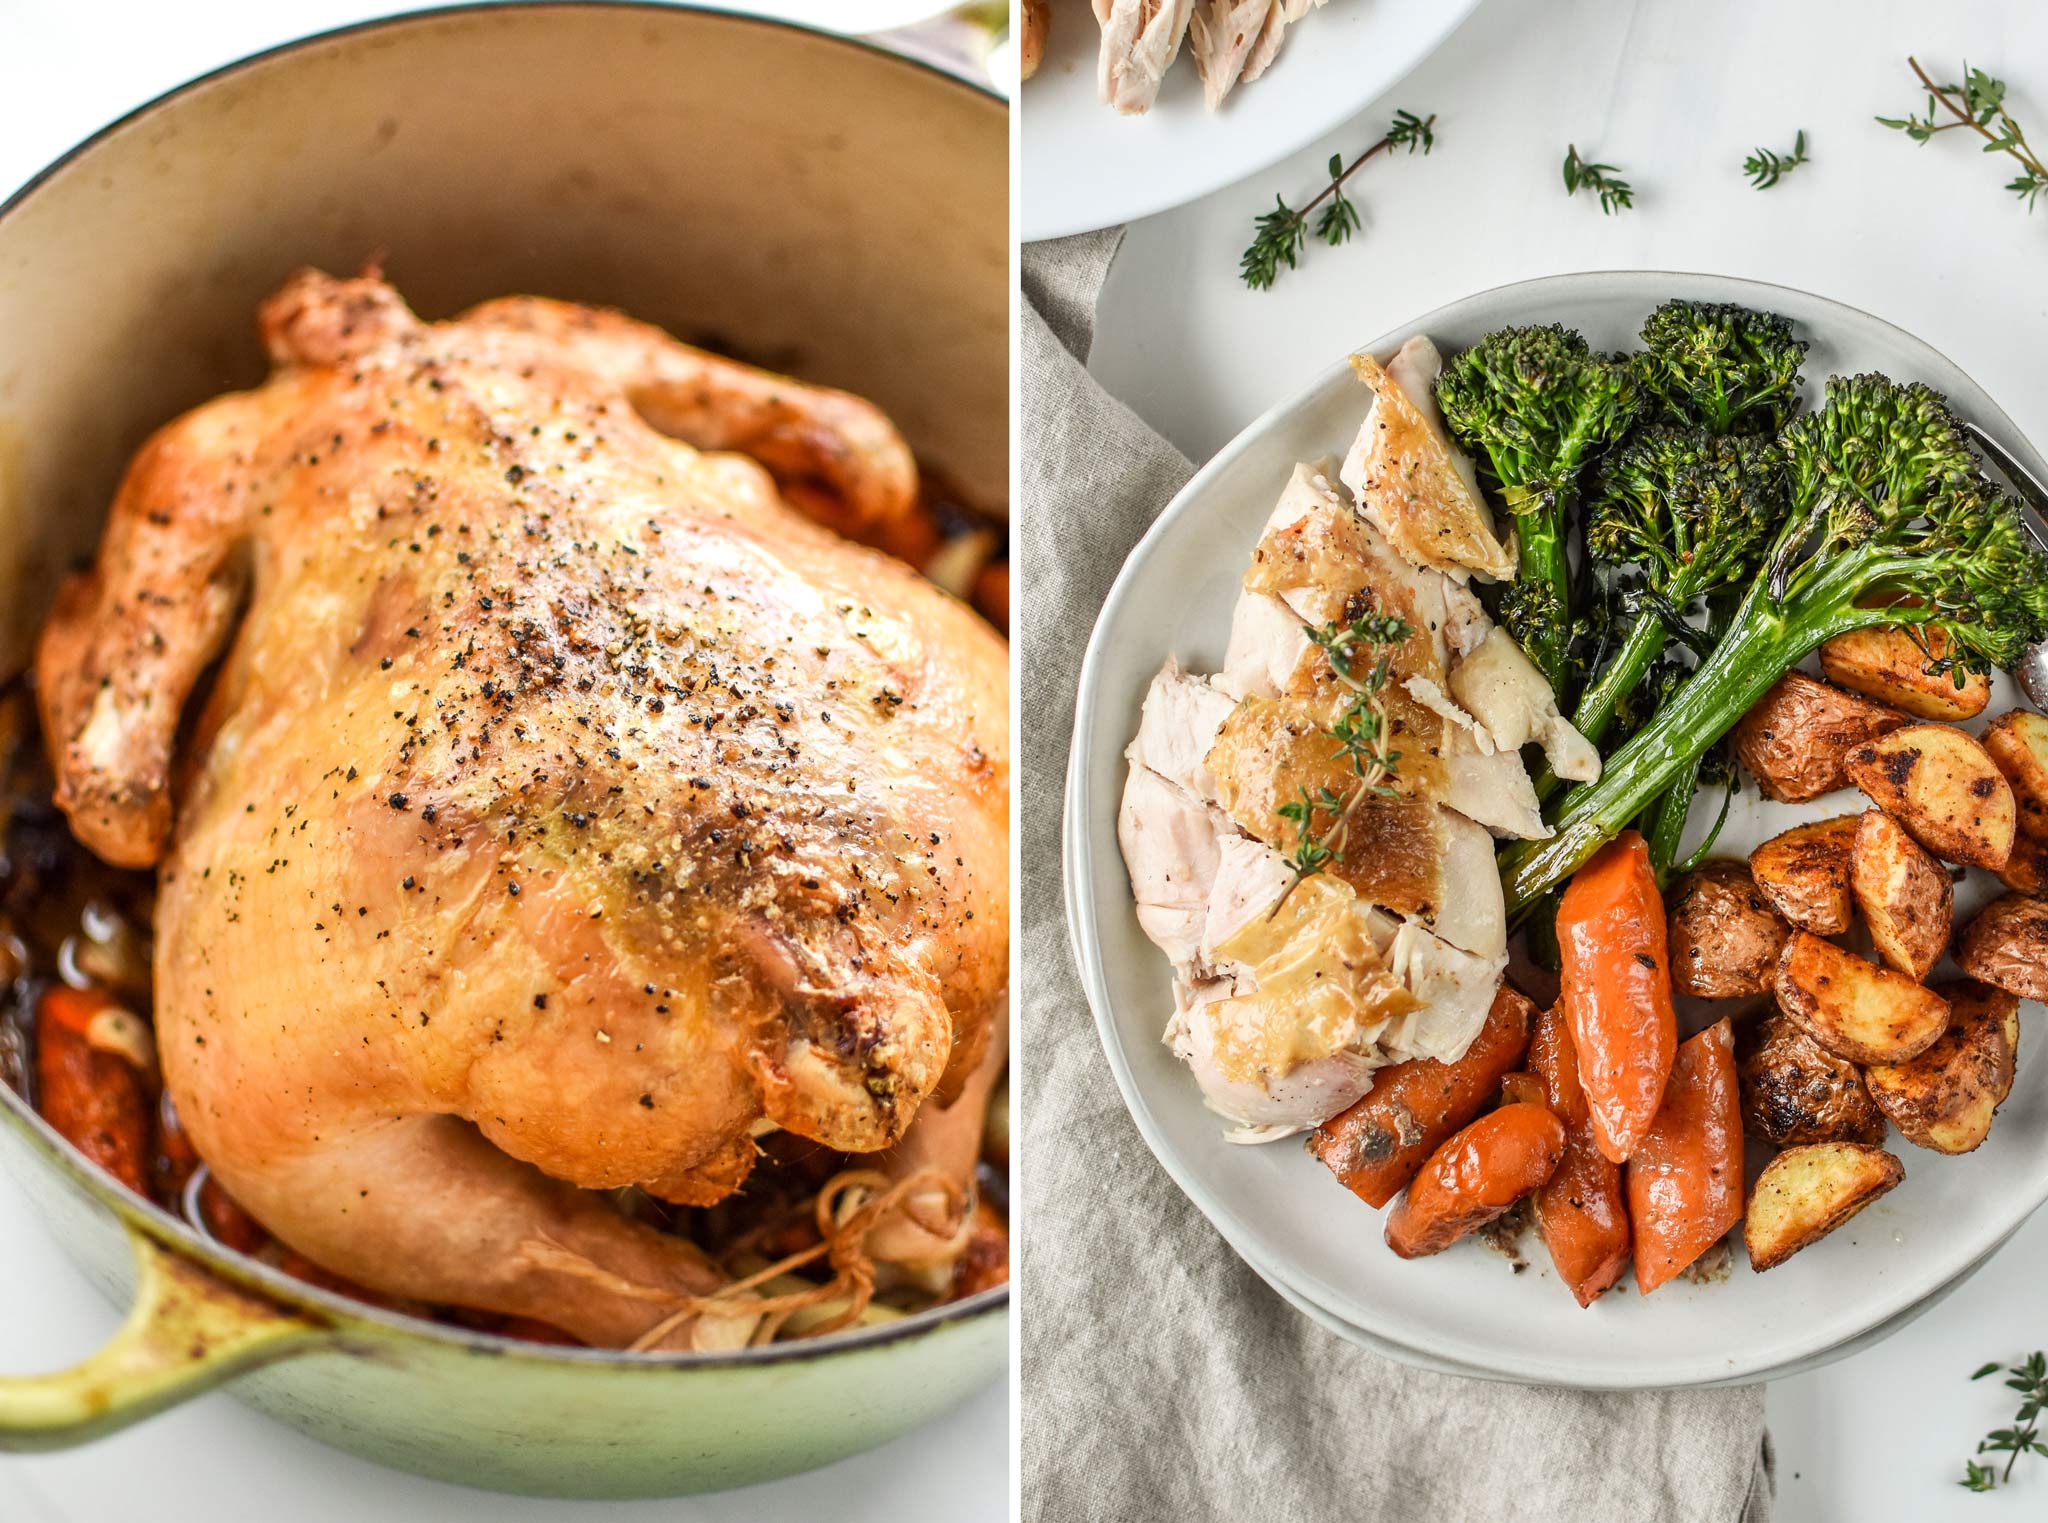 simple whole roast chicken with veggies is a great whole30 dinner recipe that makes excellent leftovers